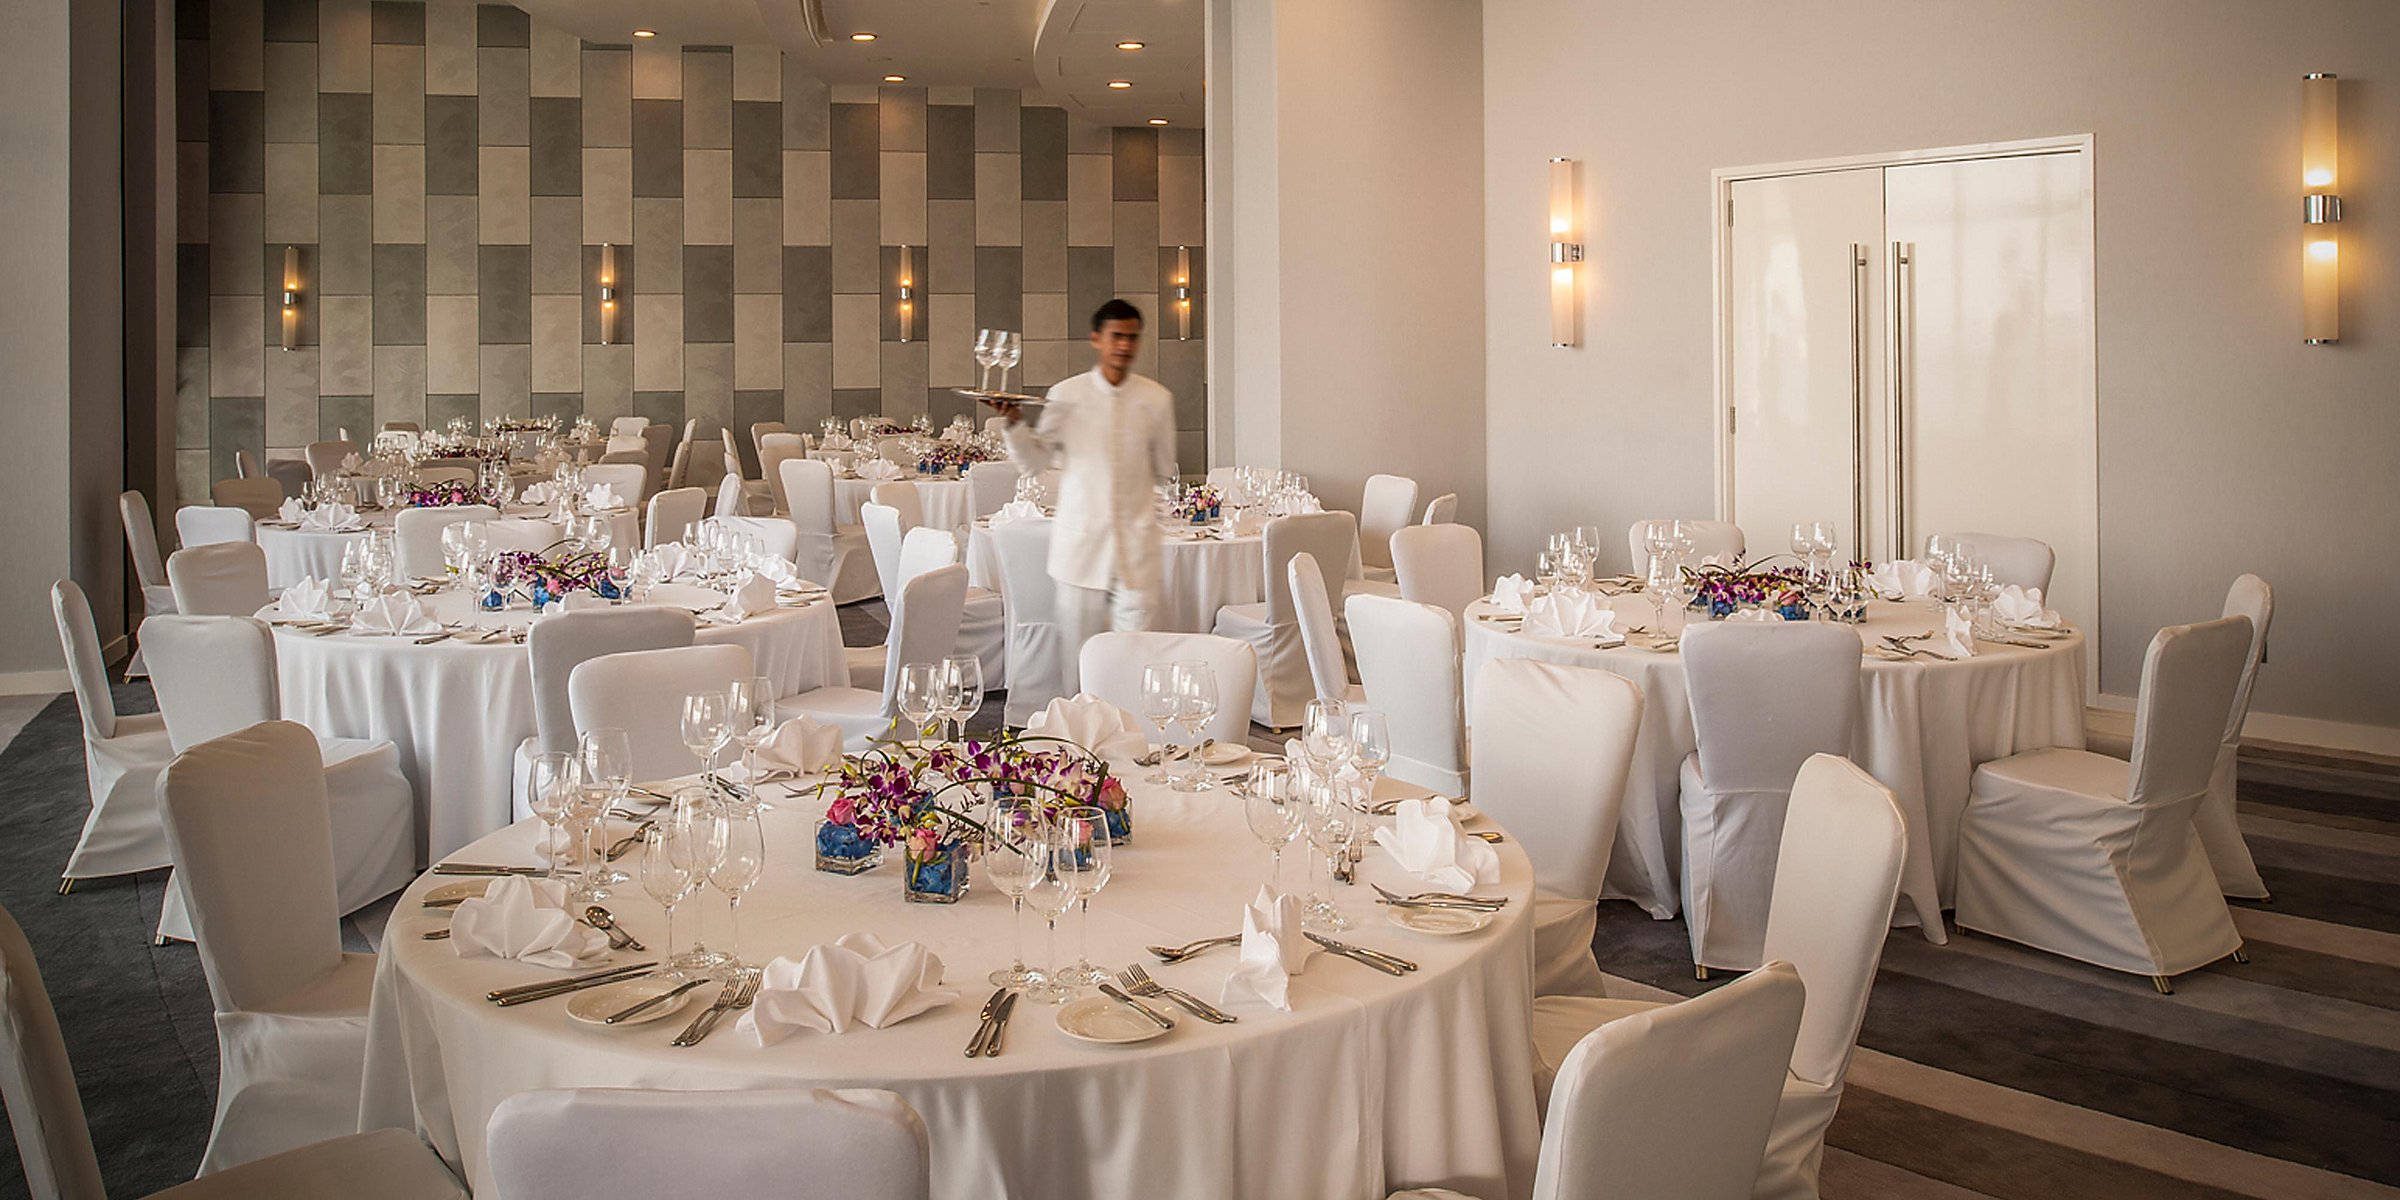 Meeting Rooms And Event Spaces In Dubai Intercontinental Dubai